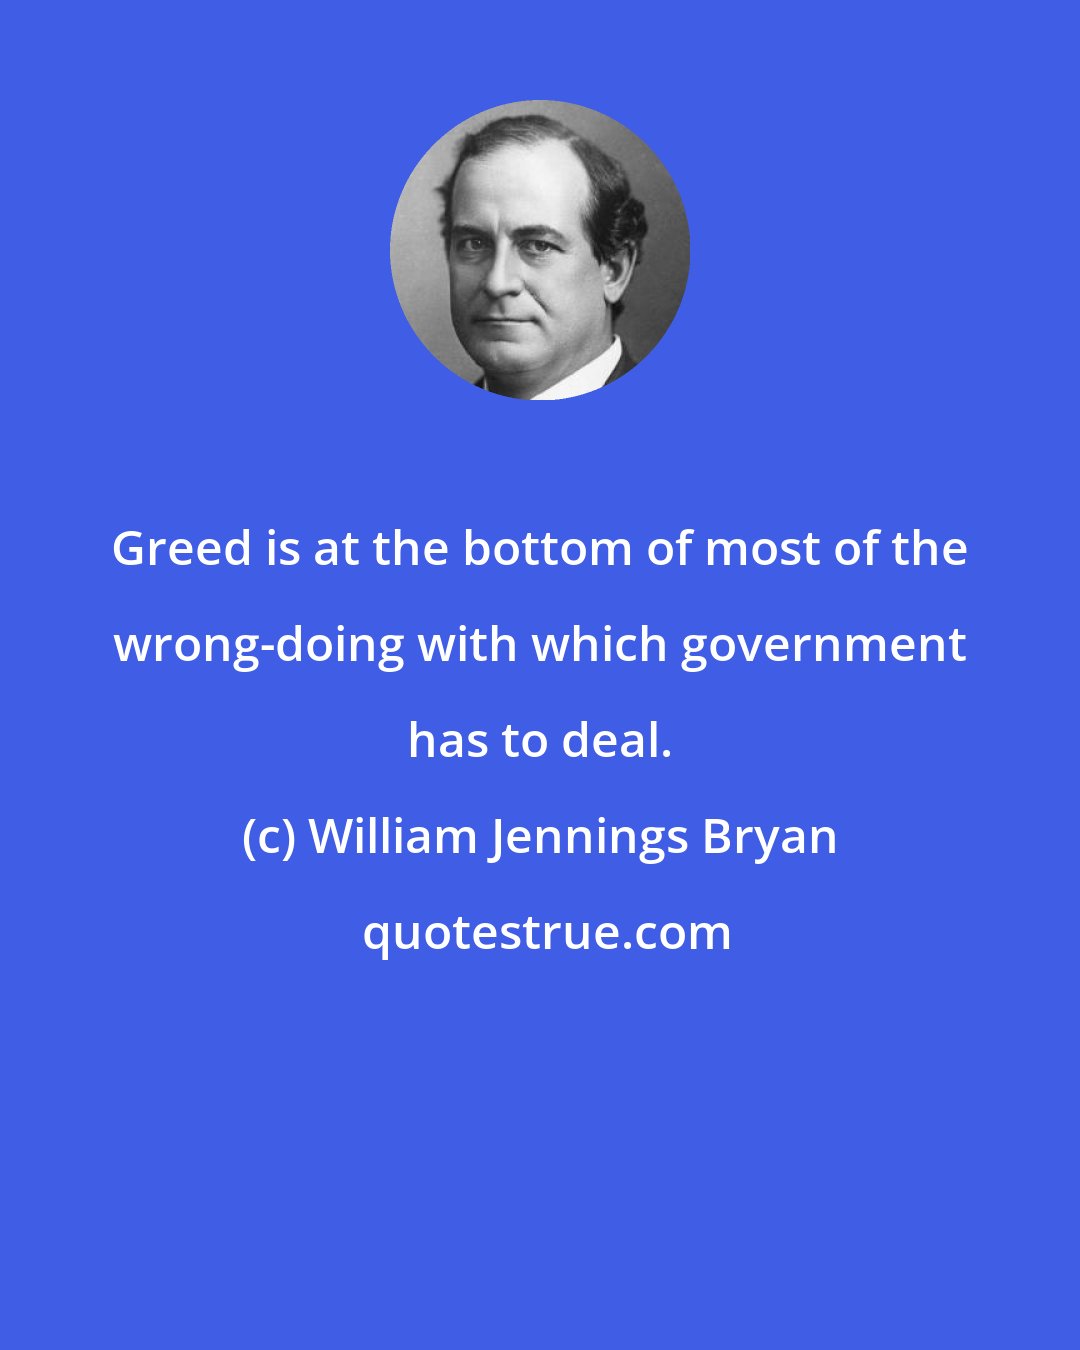 William Jennings Bryan: Greed is at the bottom of most of the wrong-doing with which government has to deal.